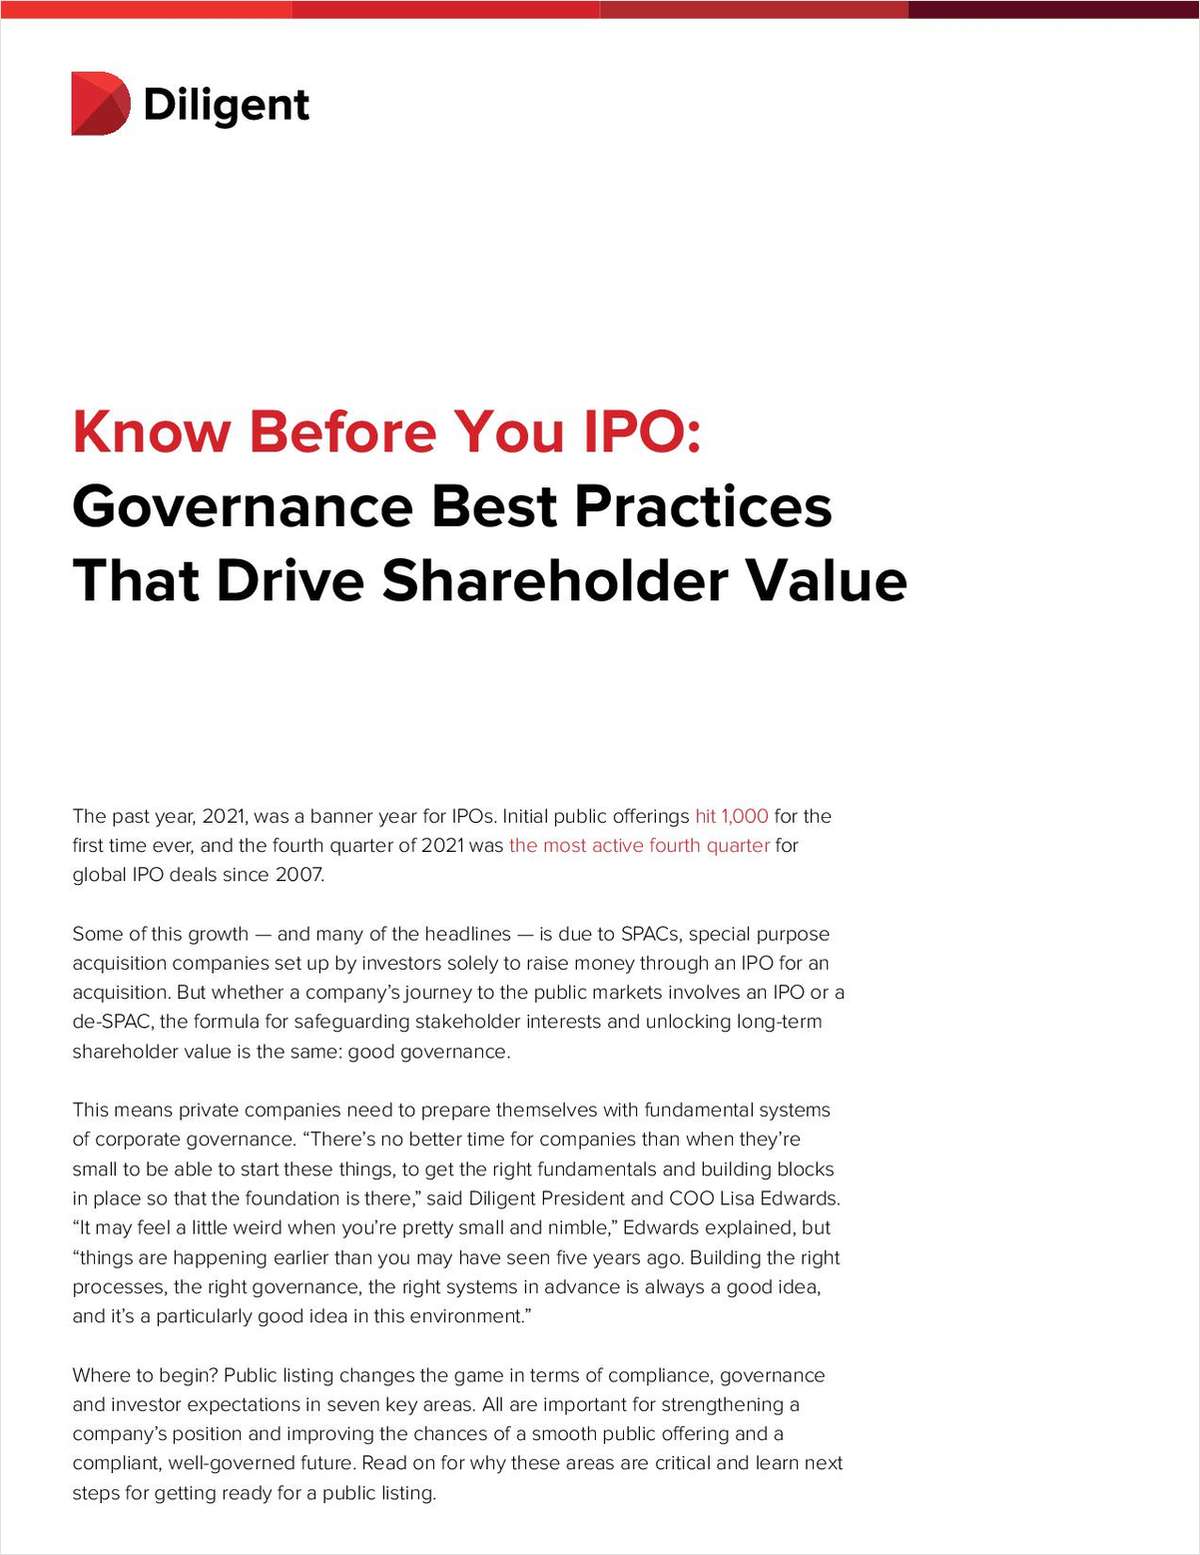 Know Before You IPO Checklist